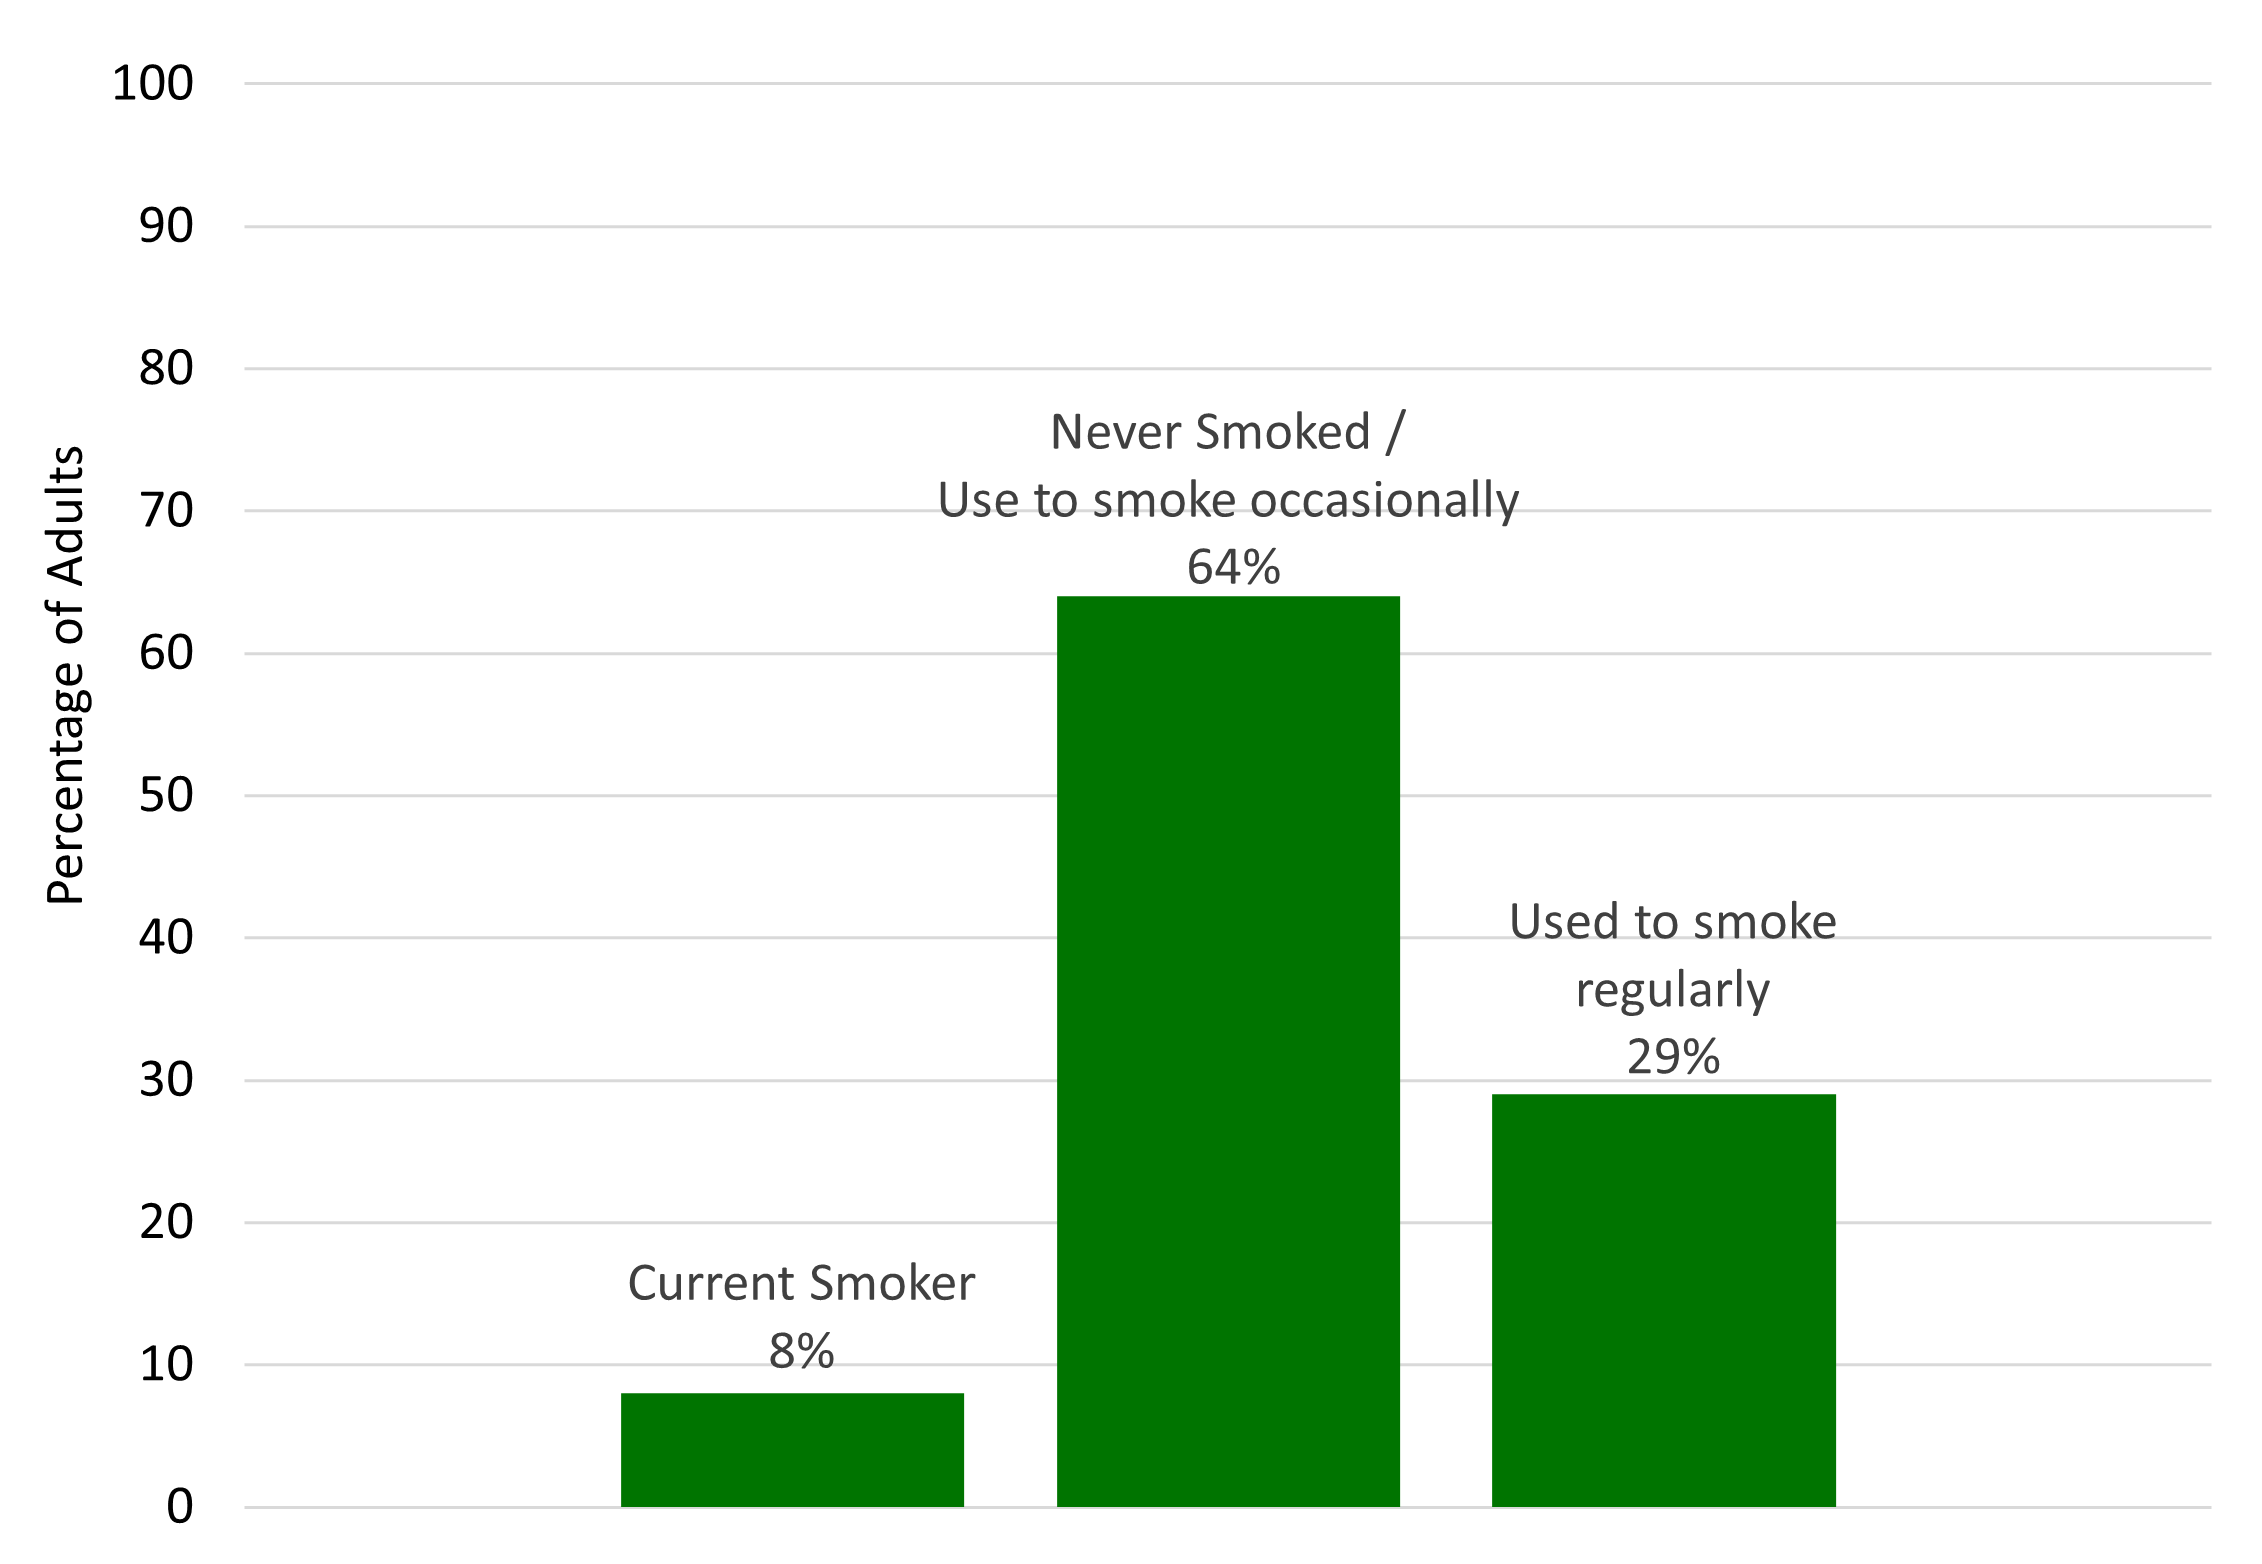 Bar graph showing that the largest category of Midlothian adults identify as never smoked, or used to smoke occasionally, as opposed to being a current smoker or previously smoking regularly. 